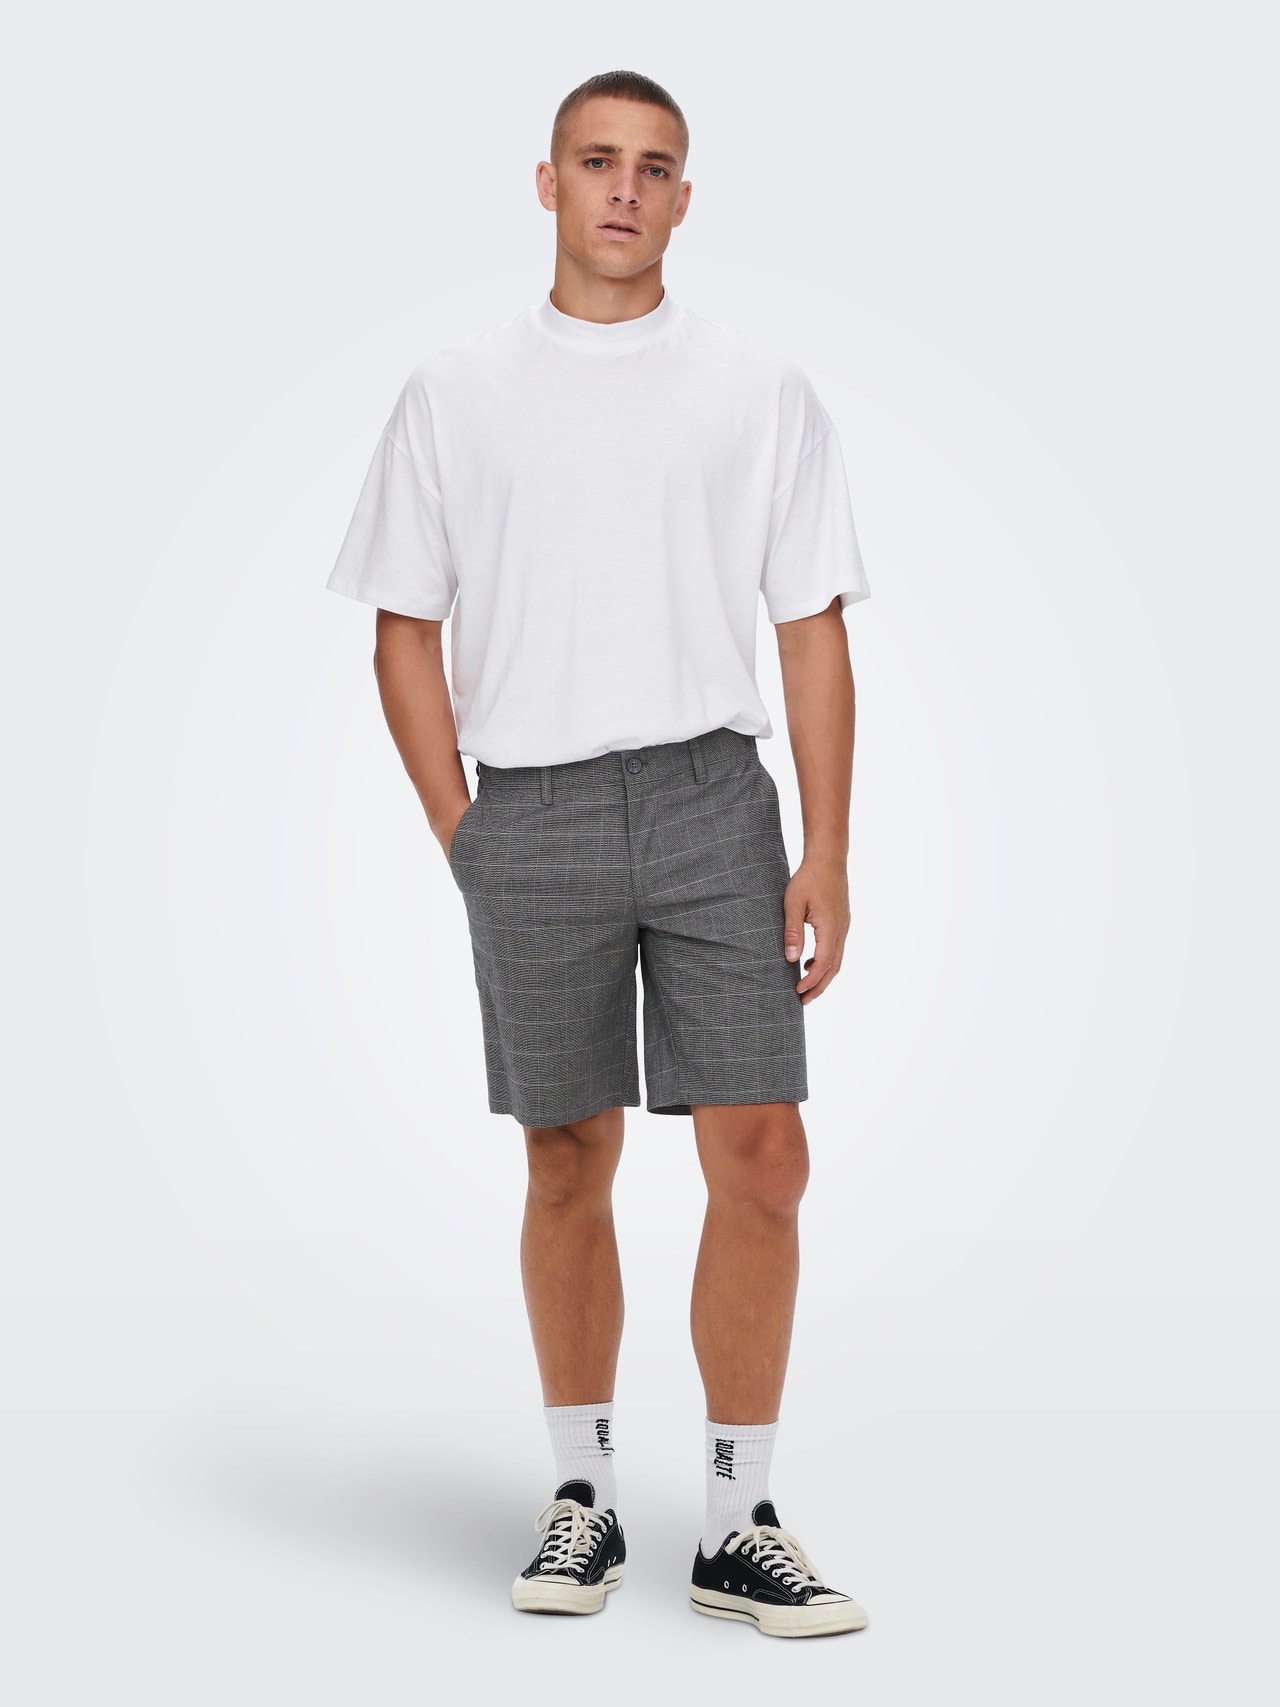 ONLY & SONS Normal passform Shorts -Grey Pinstripe - 22020475